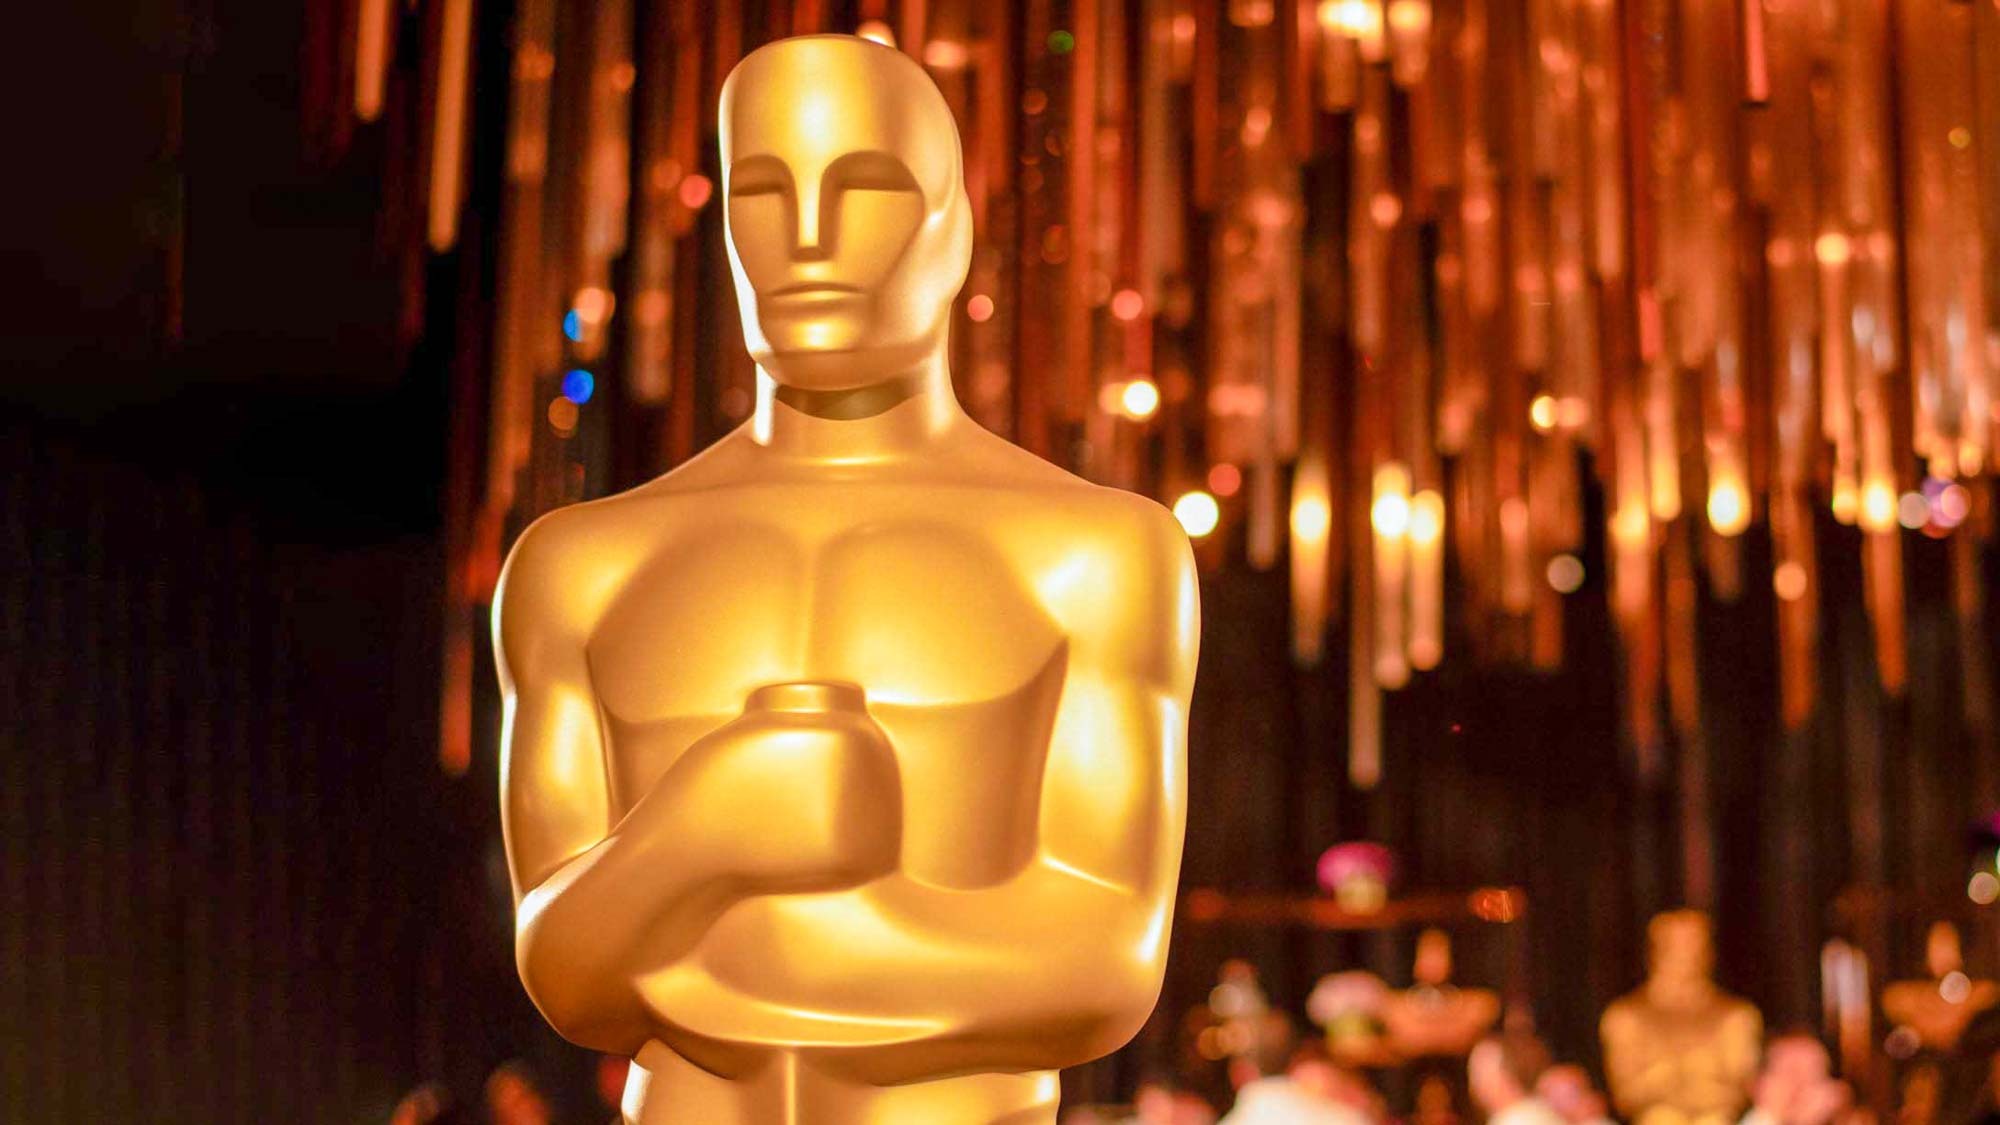 Oscars Oasis - Shows Online: Find where to watch streaming online -  Justdial Spain